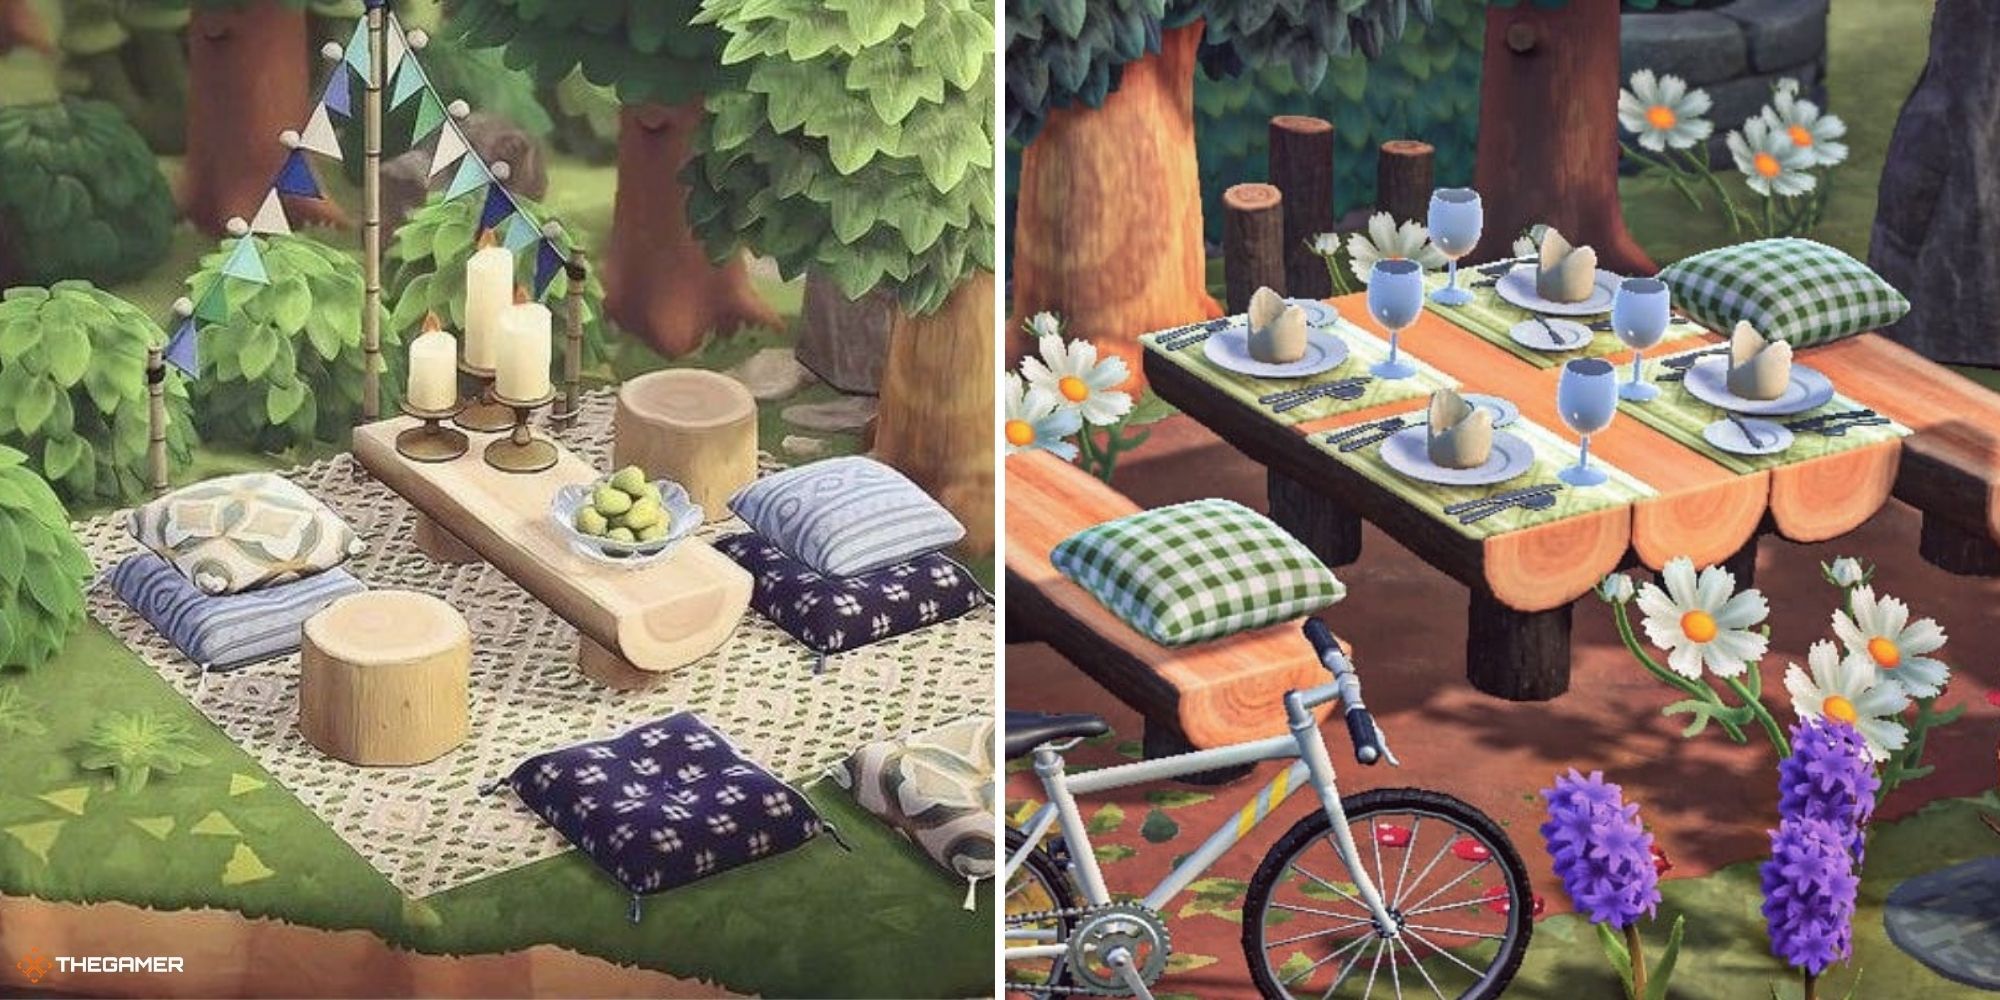 Animal Crossing New Horizons 10 Ways To Decorate Small Spaces